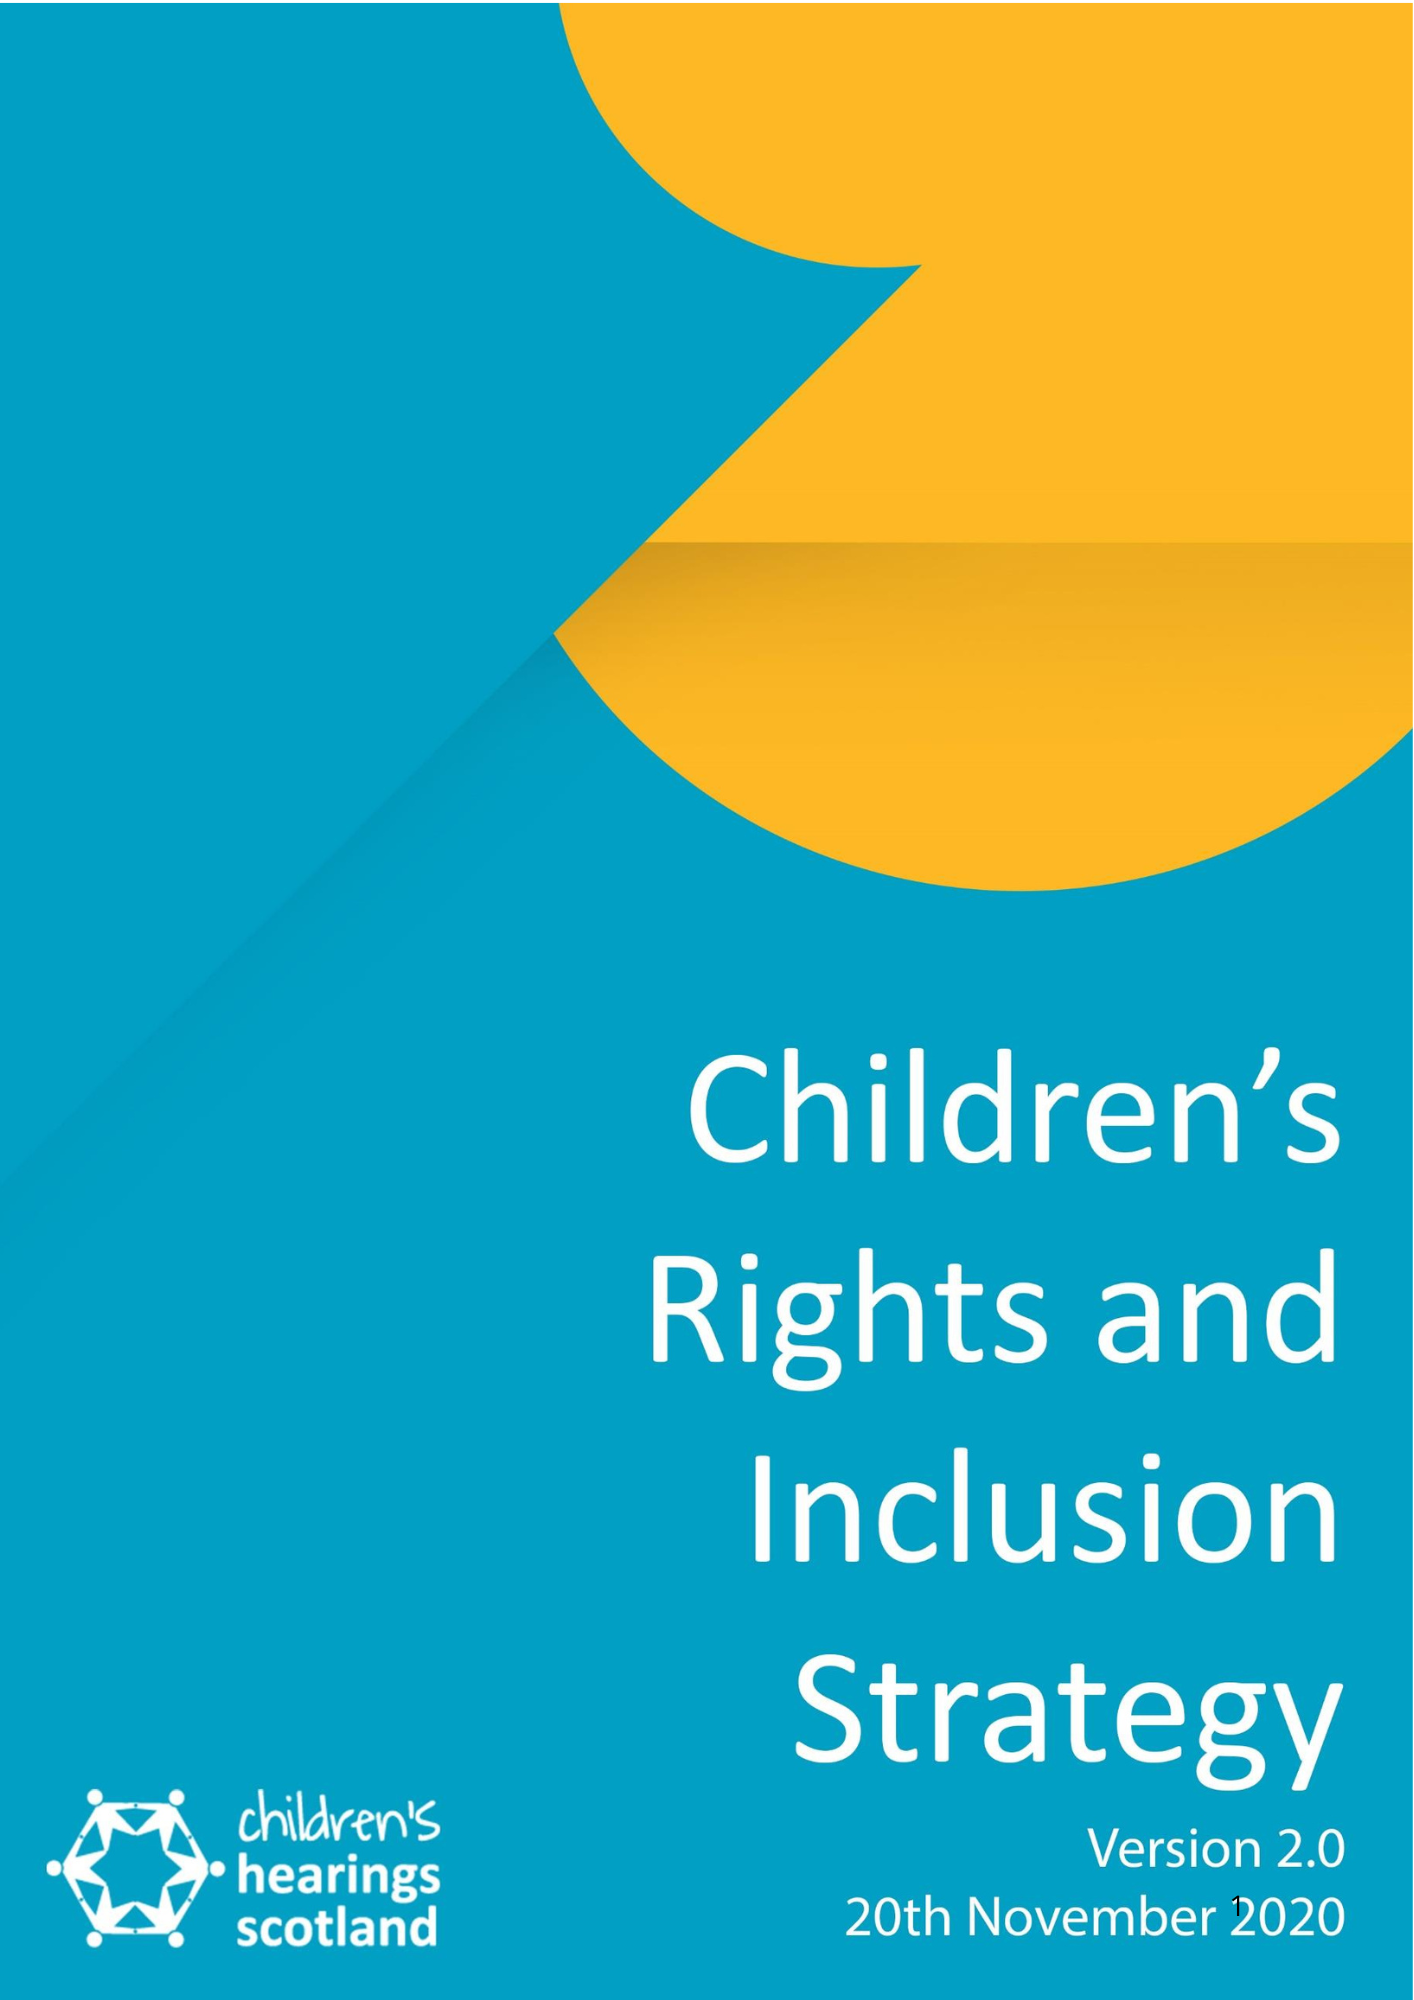 Children's Rights and Inclusion Strategy - Consultation